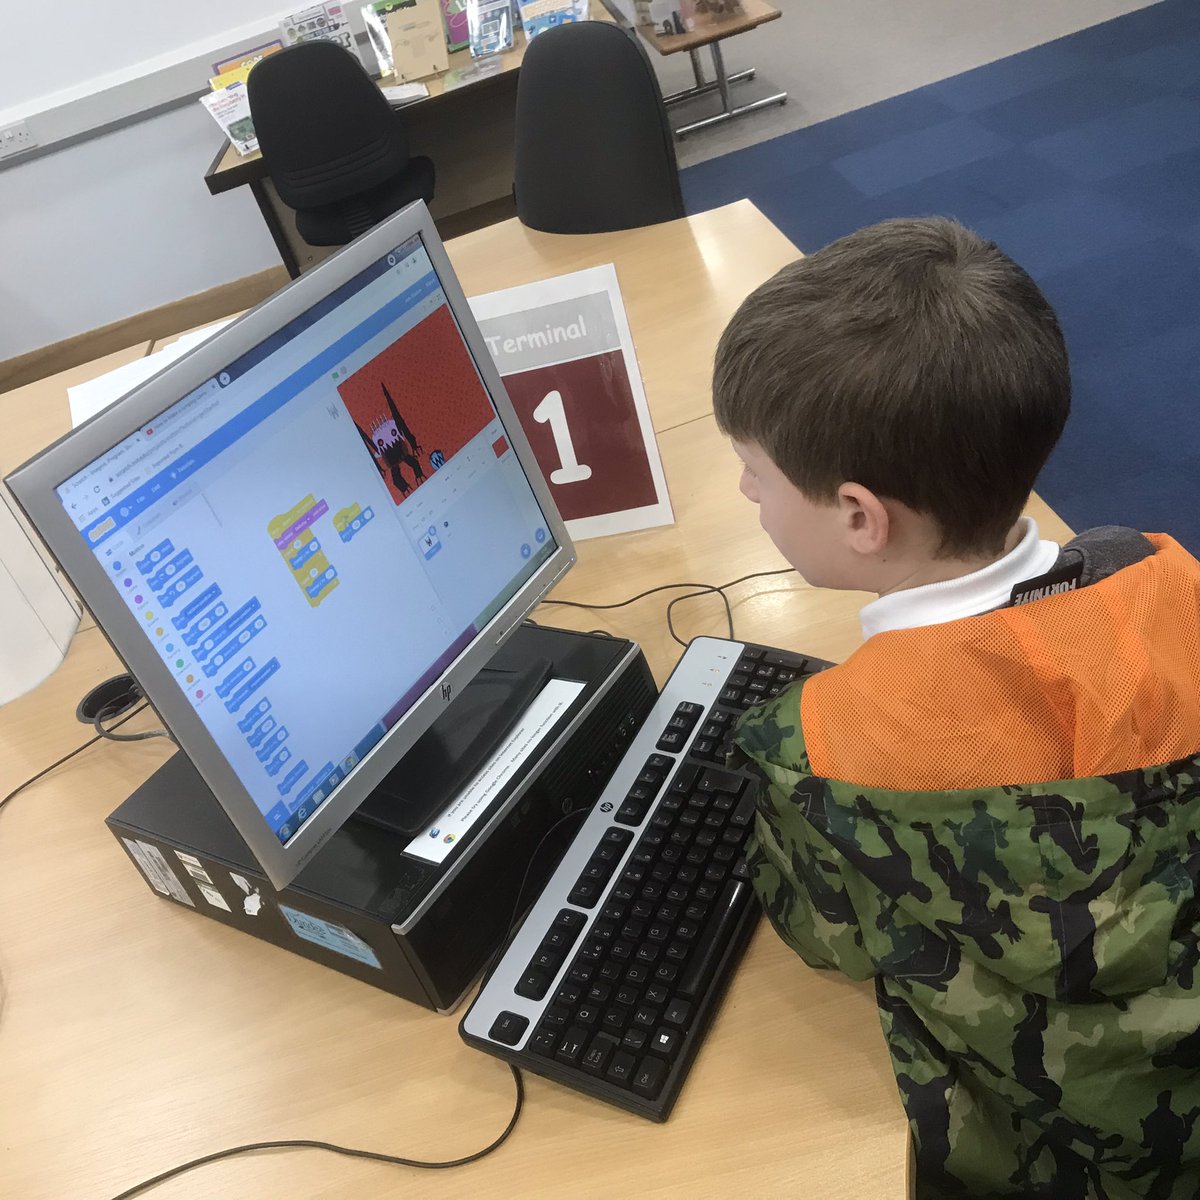 Our Junior Makers tonight using Lego to develop spatial awareness and planning. Little acorns and all that. Today castles - tomorrow who knows? #libraries #codingforkids